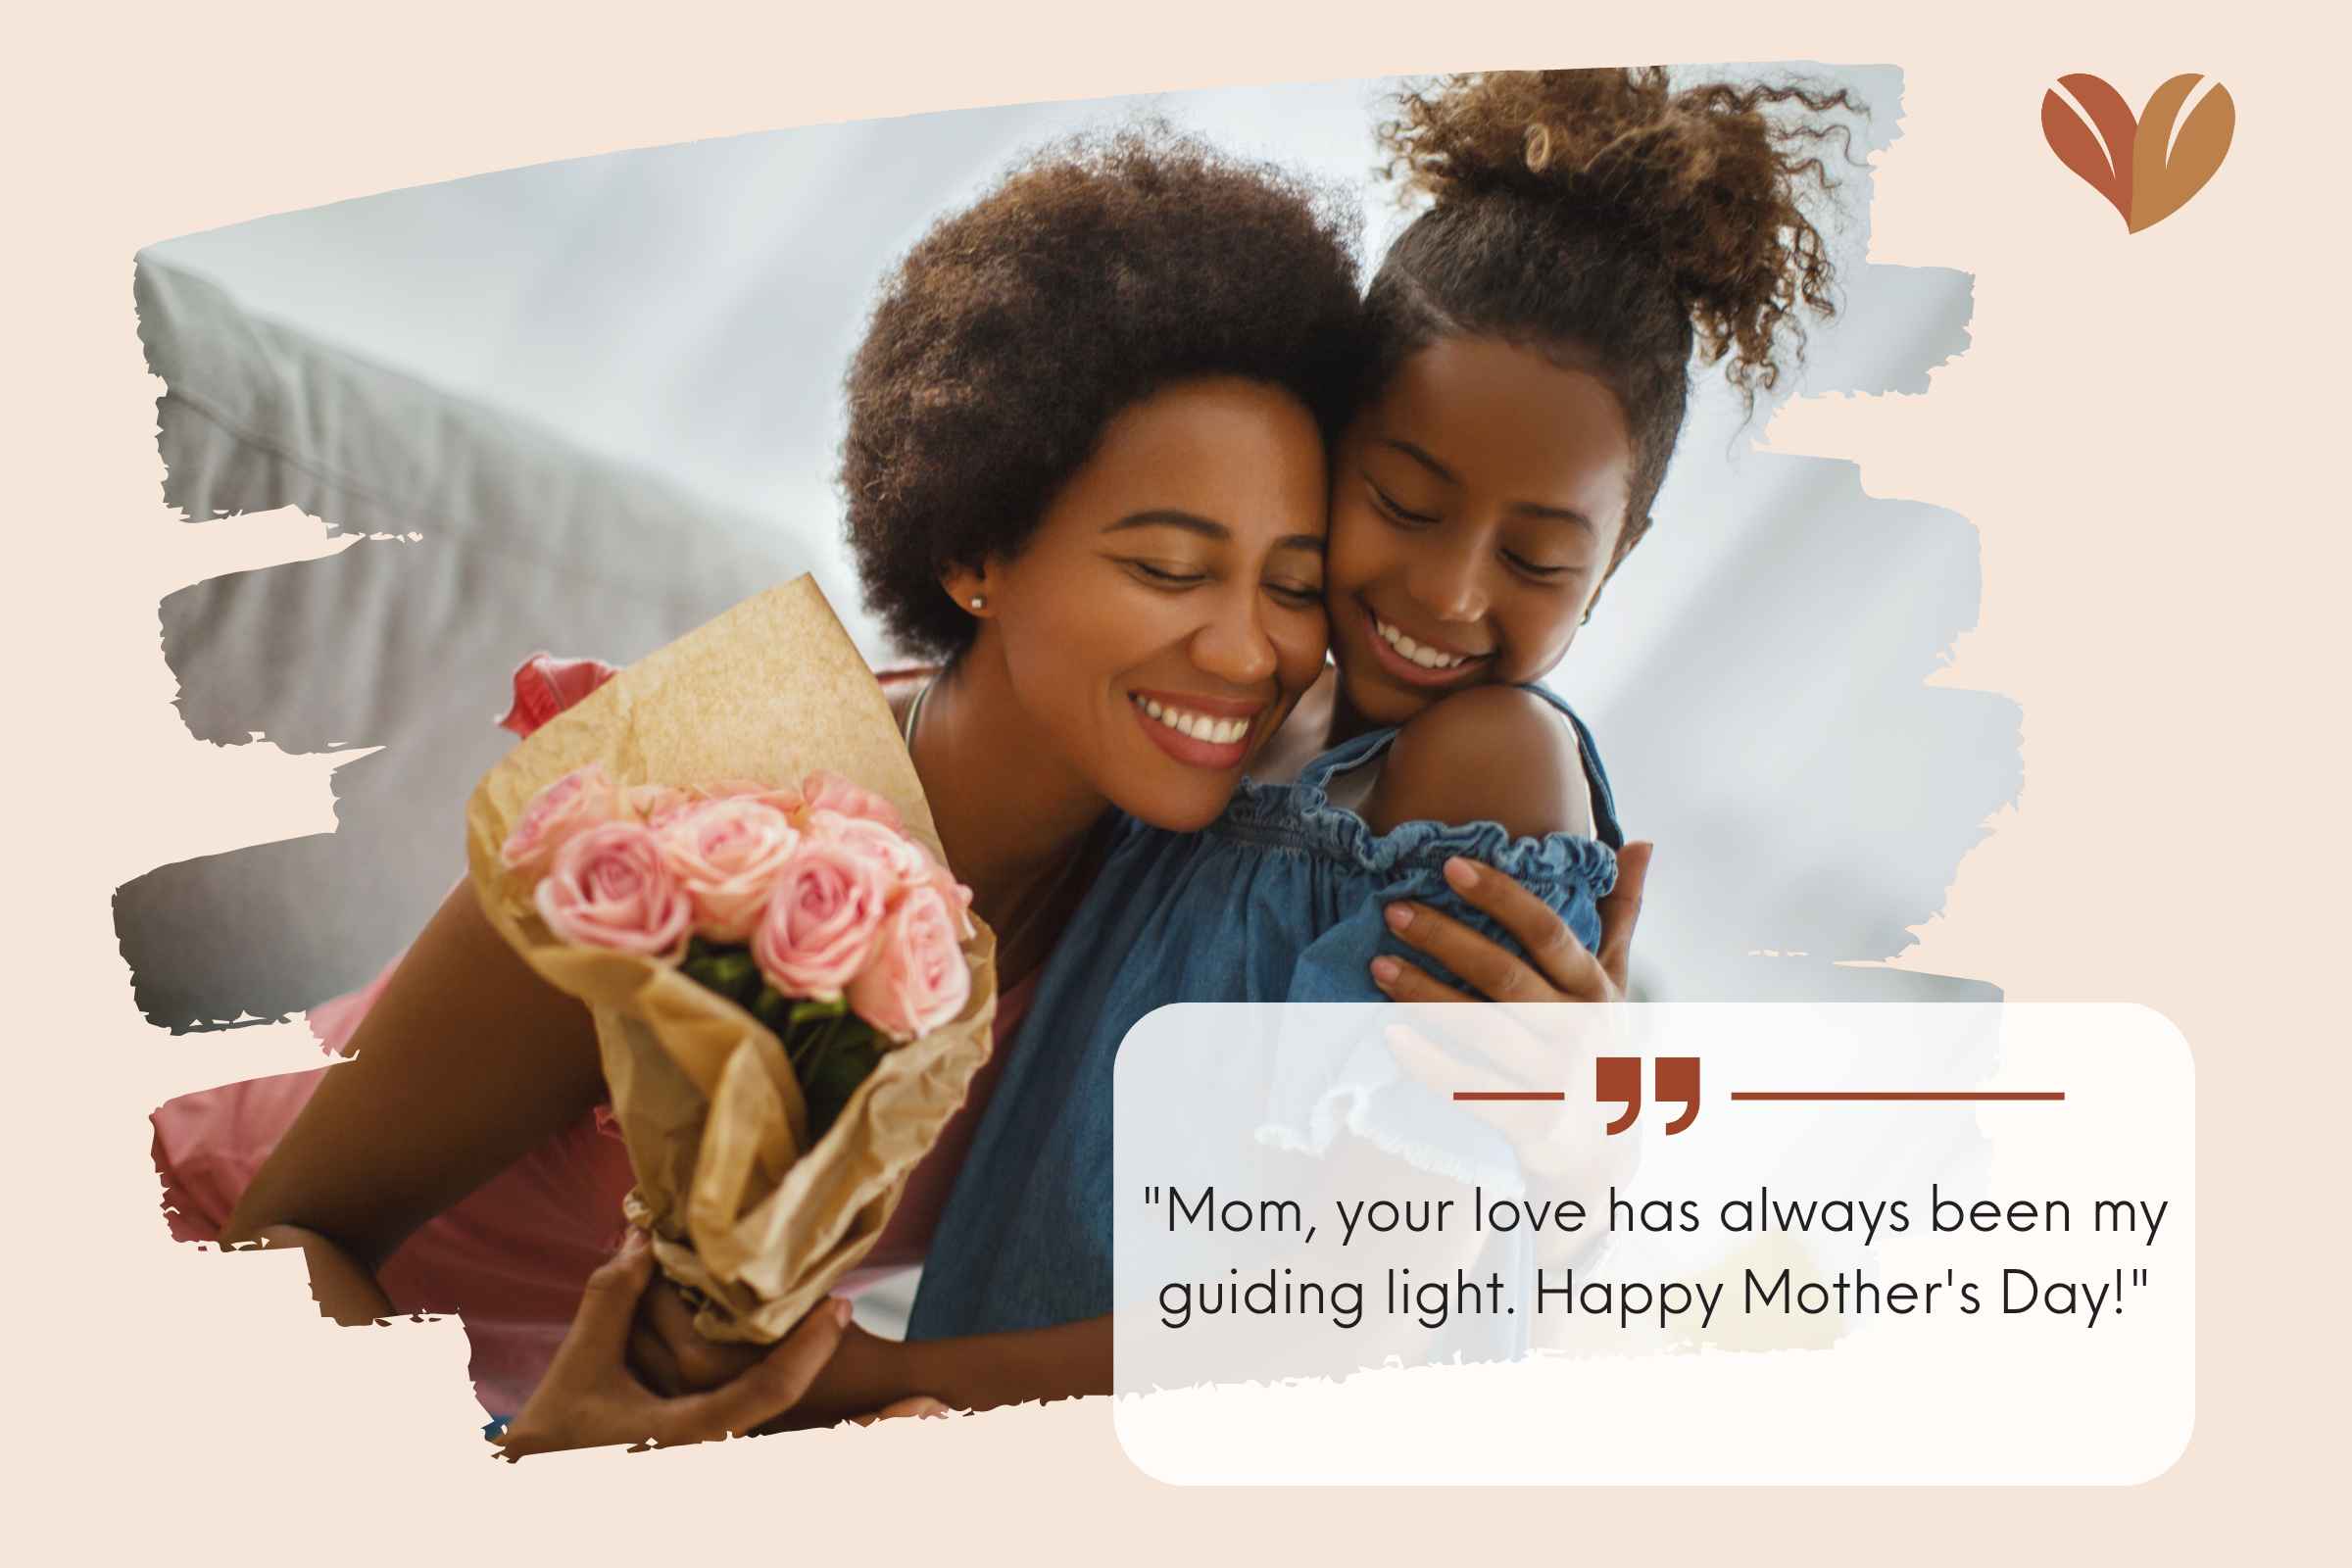 "Mom, your love has always been my guiding light. Happy Mother's Day!"